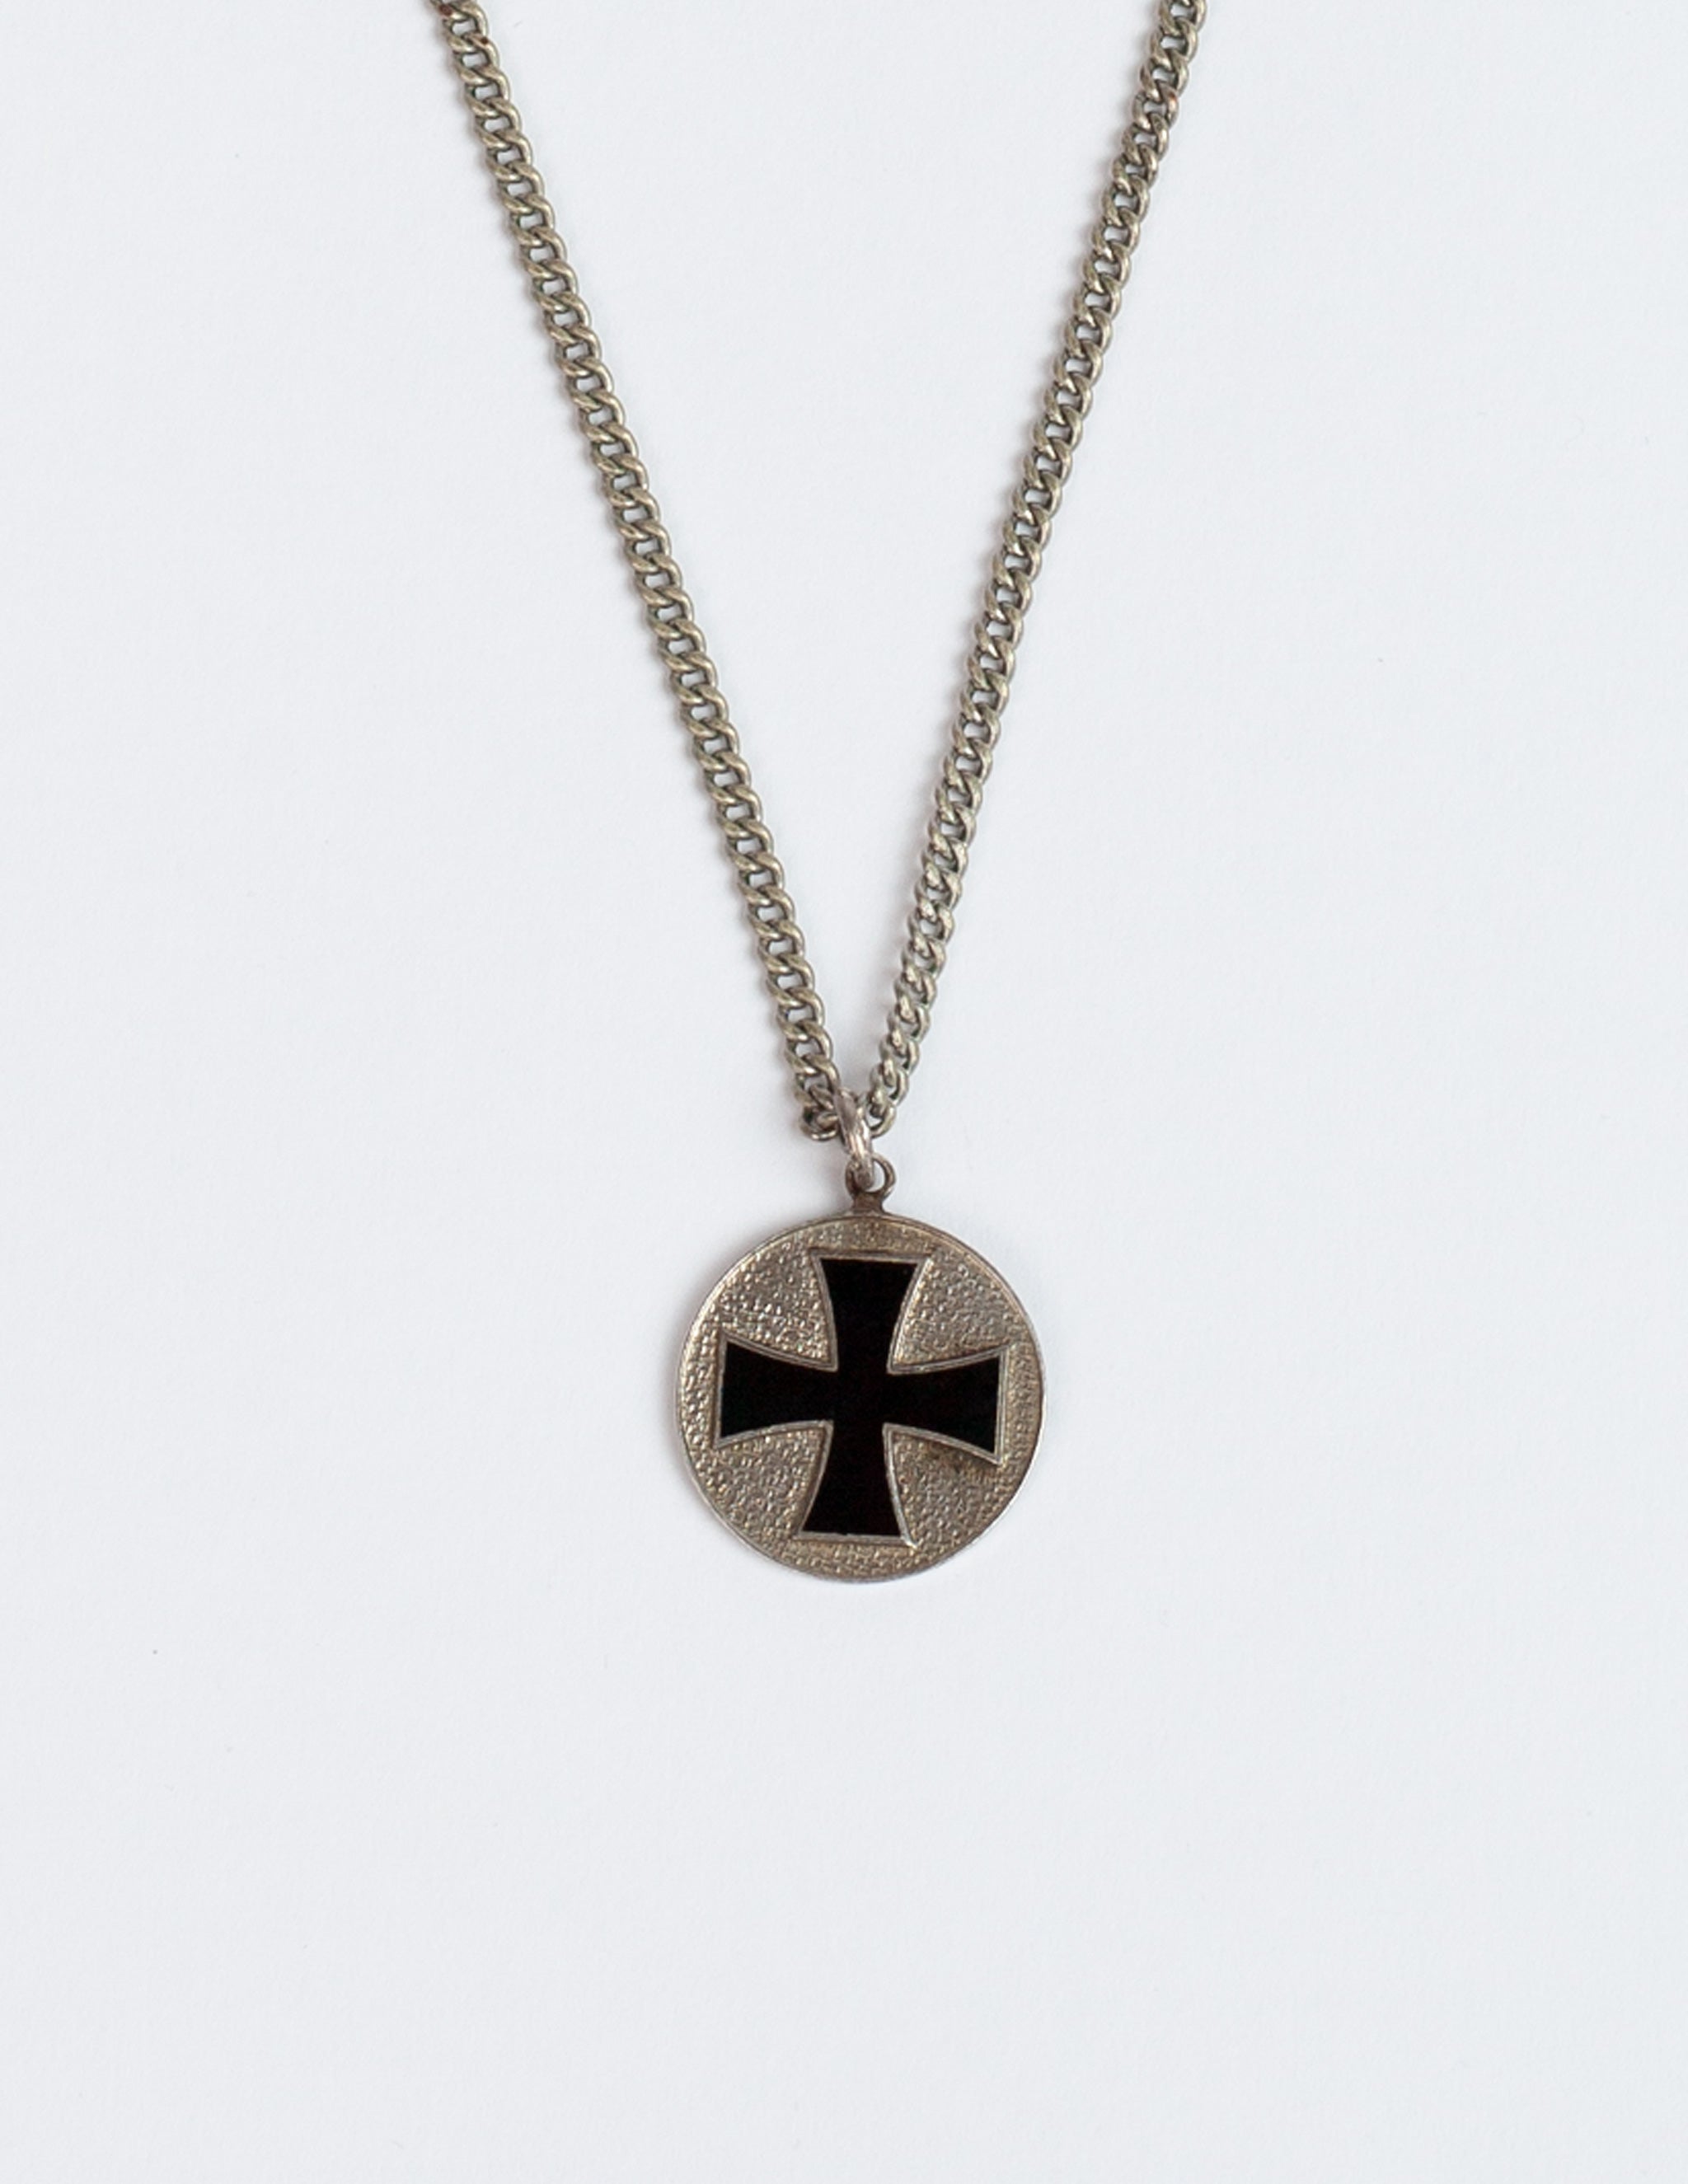 Surfer Necklace with silver Mens Cross Pendant - Zulasurfing Studios